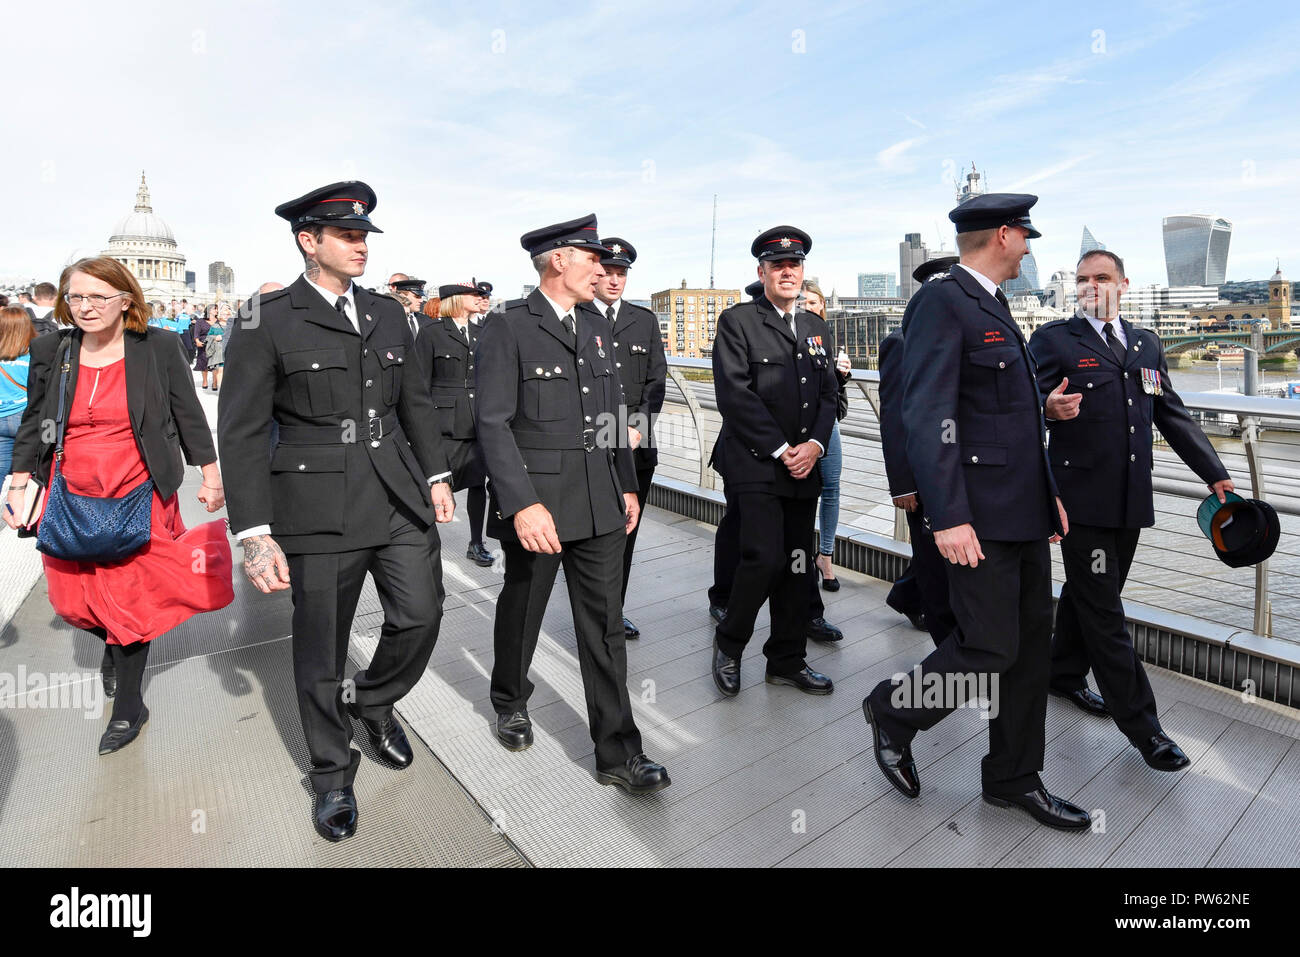 London, UK.  13 October 2018.  After a formal wreath-laying ceremony at the National Firefighters’ Memorial next to St Paul’s Cathedral, in memory of fallen firefighters representing every fire service in the UK, members of the Fire Brigades Union (FBU) take part in a formal procession across the Millennium Bridge followed by a service at Southwark Cathedral to commemorate the centenary of the formation of the FBU. The activities are the largest ever ceremonial event for firefighters killed in the line of duty.  Credit: Stephen Chung / Alamy Live News Stock Photo